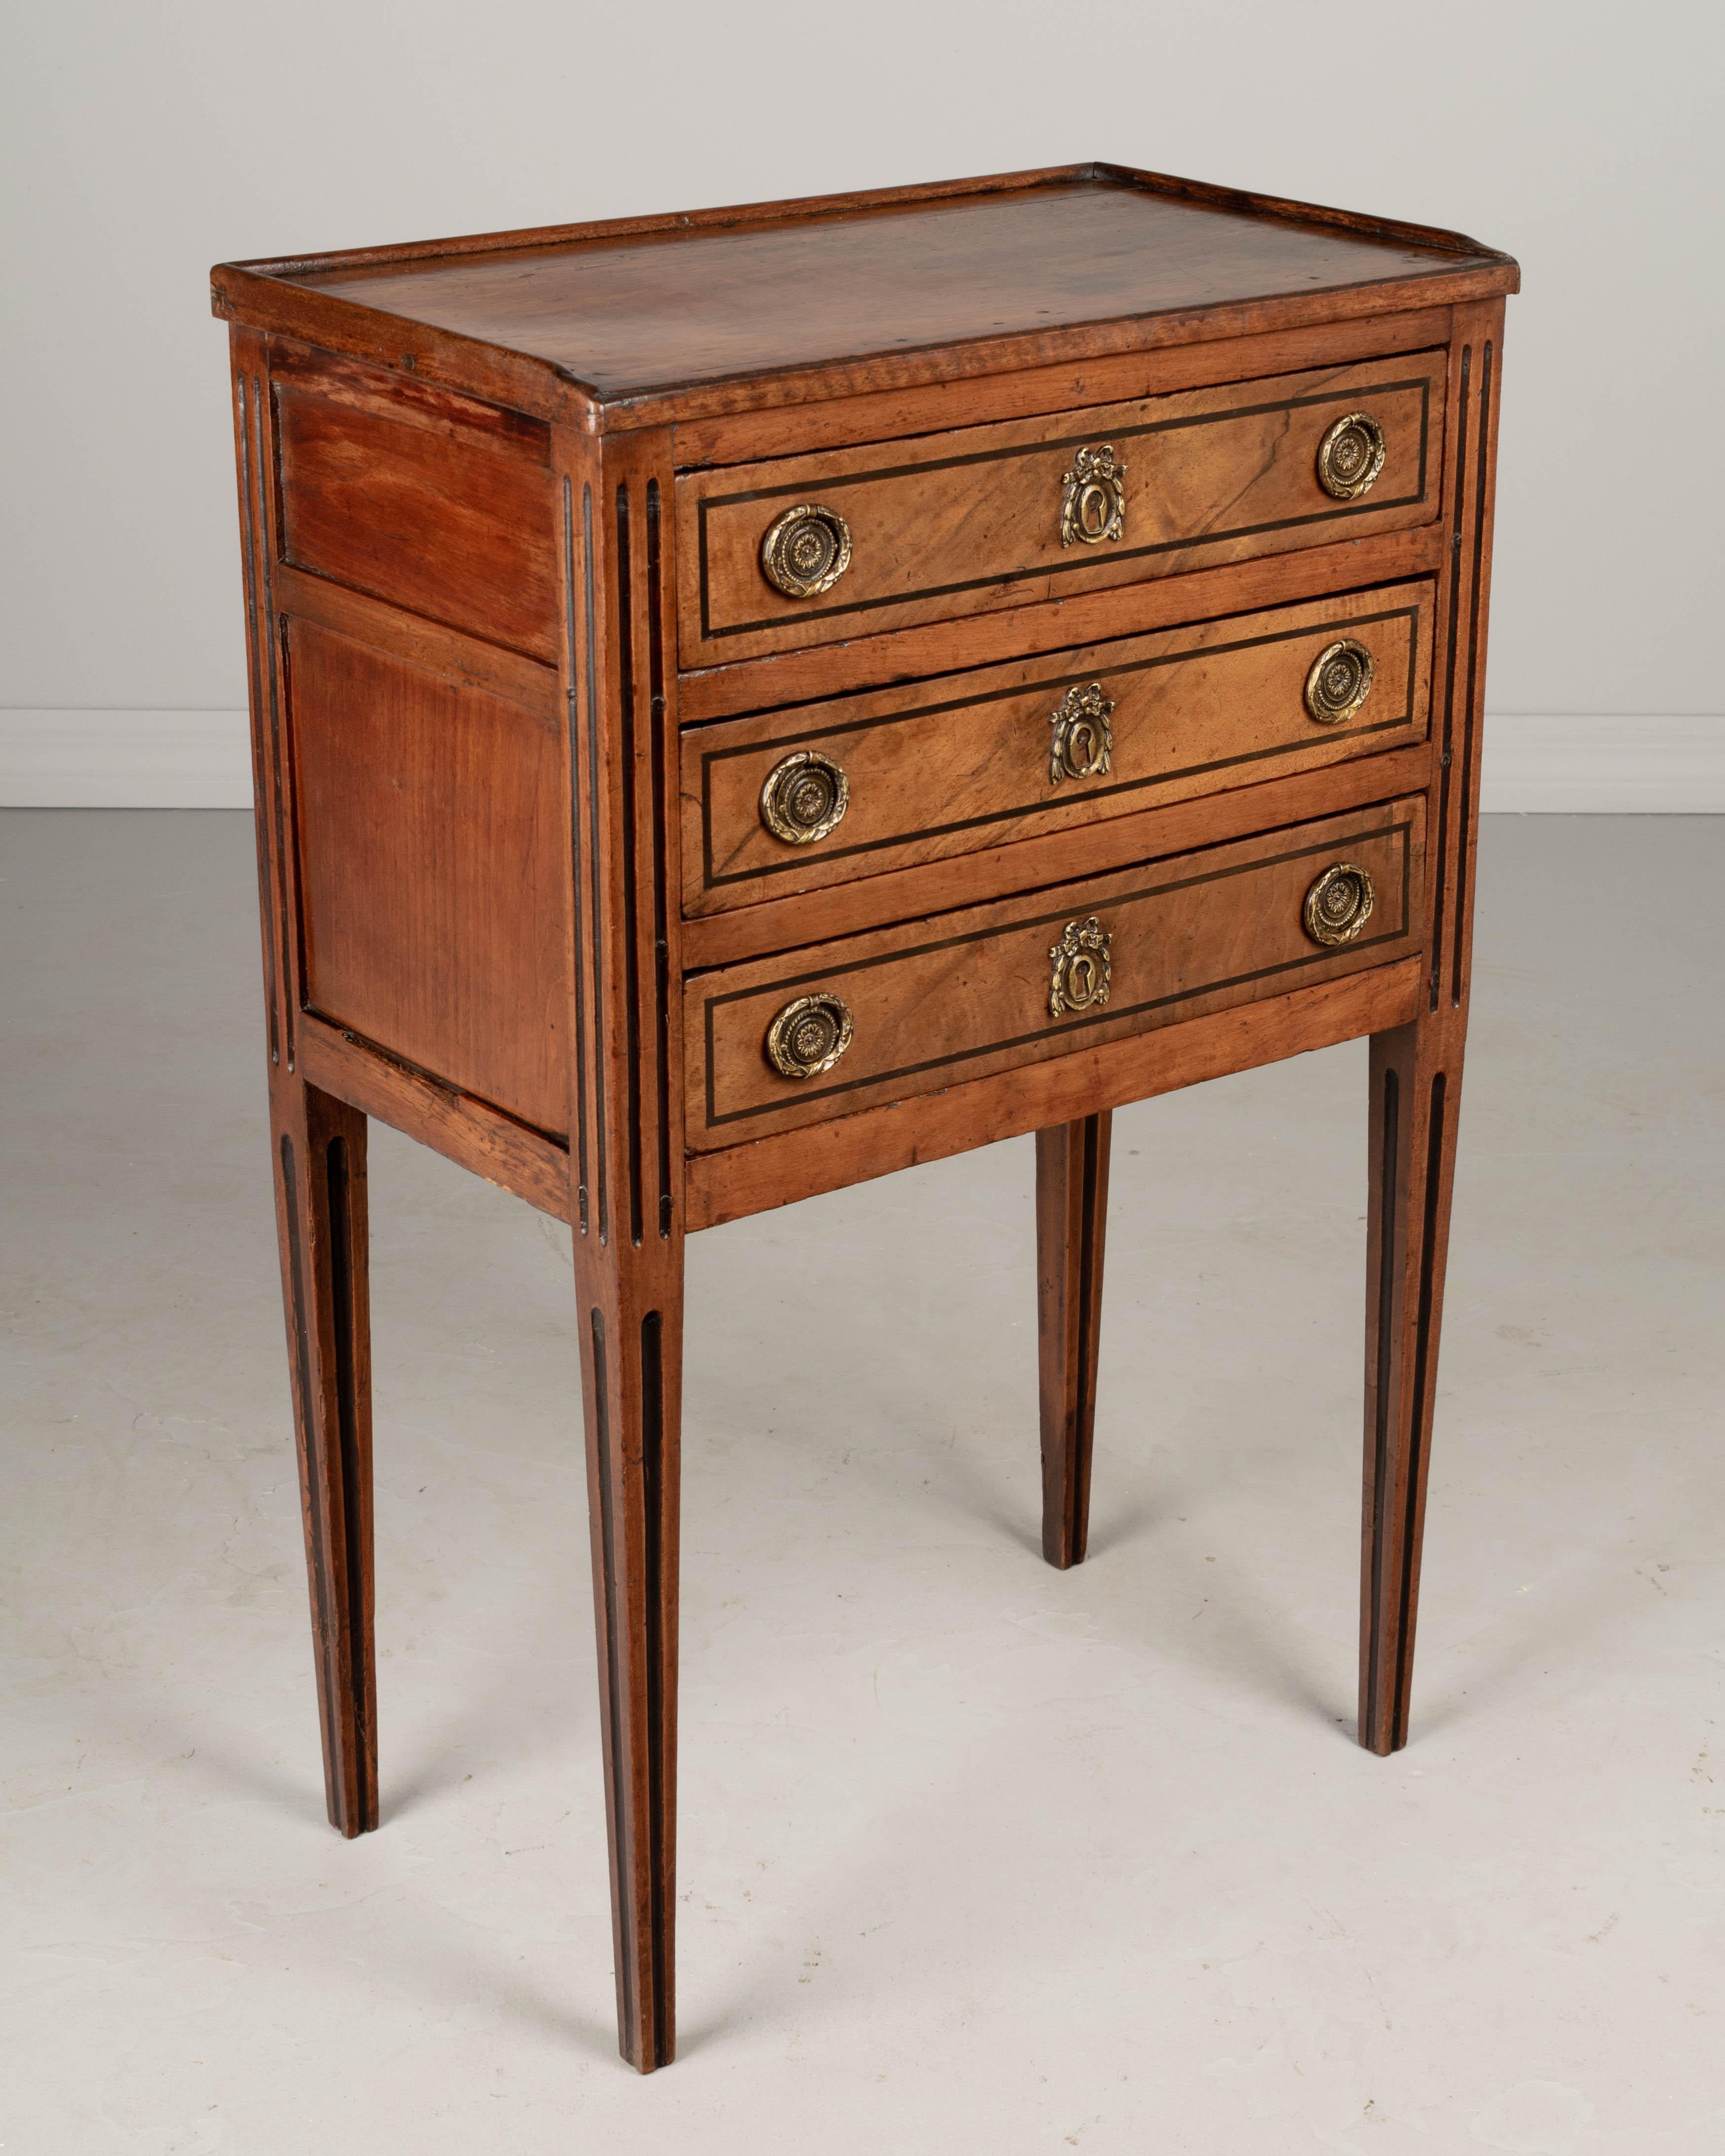 A late 18th century French Louis XVI Period side table made of solid walnut and cherry with black accent details. Three dovetailed drawers with original cast brass ring pulls. fine craftsmanship with traditional pegged construction. Elegant